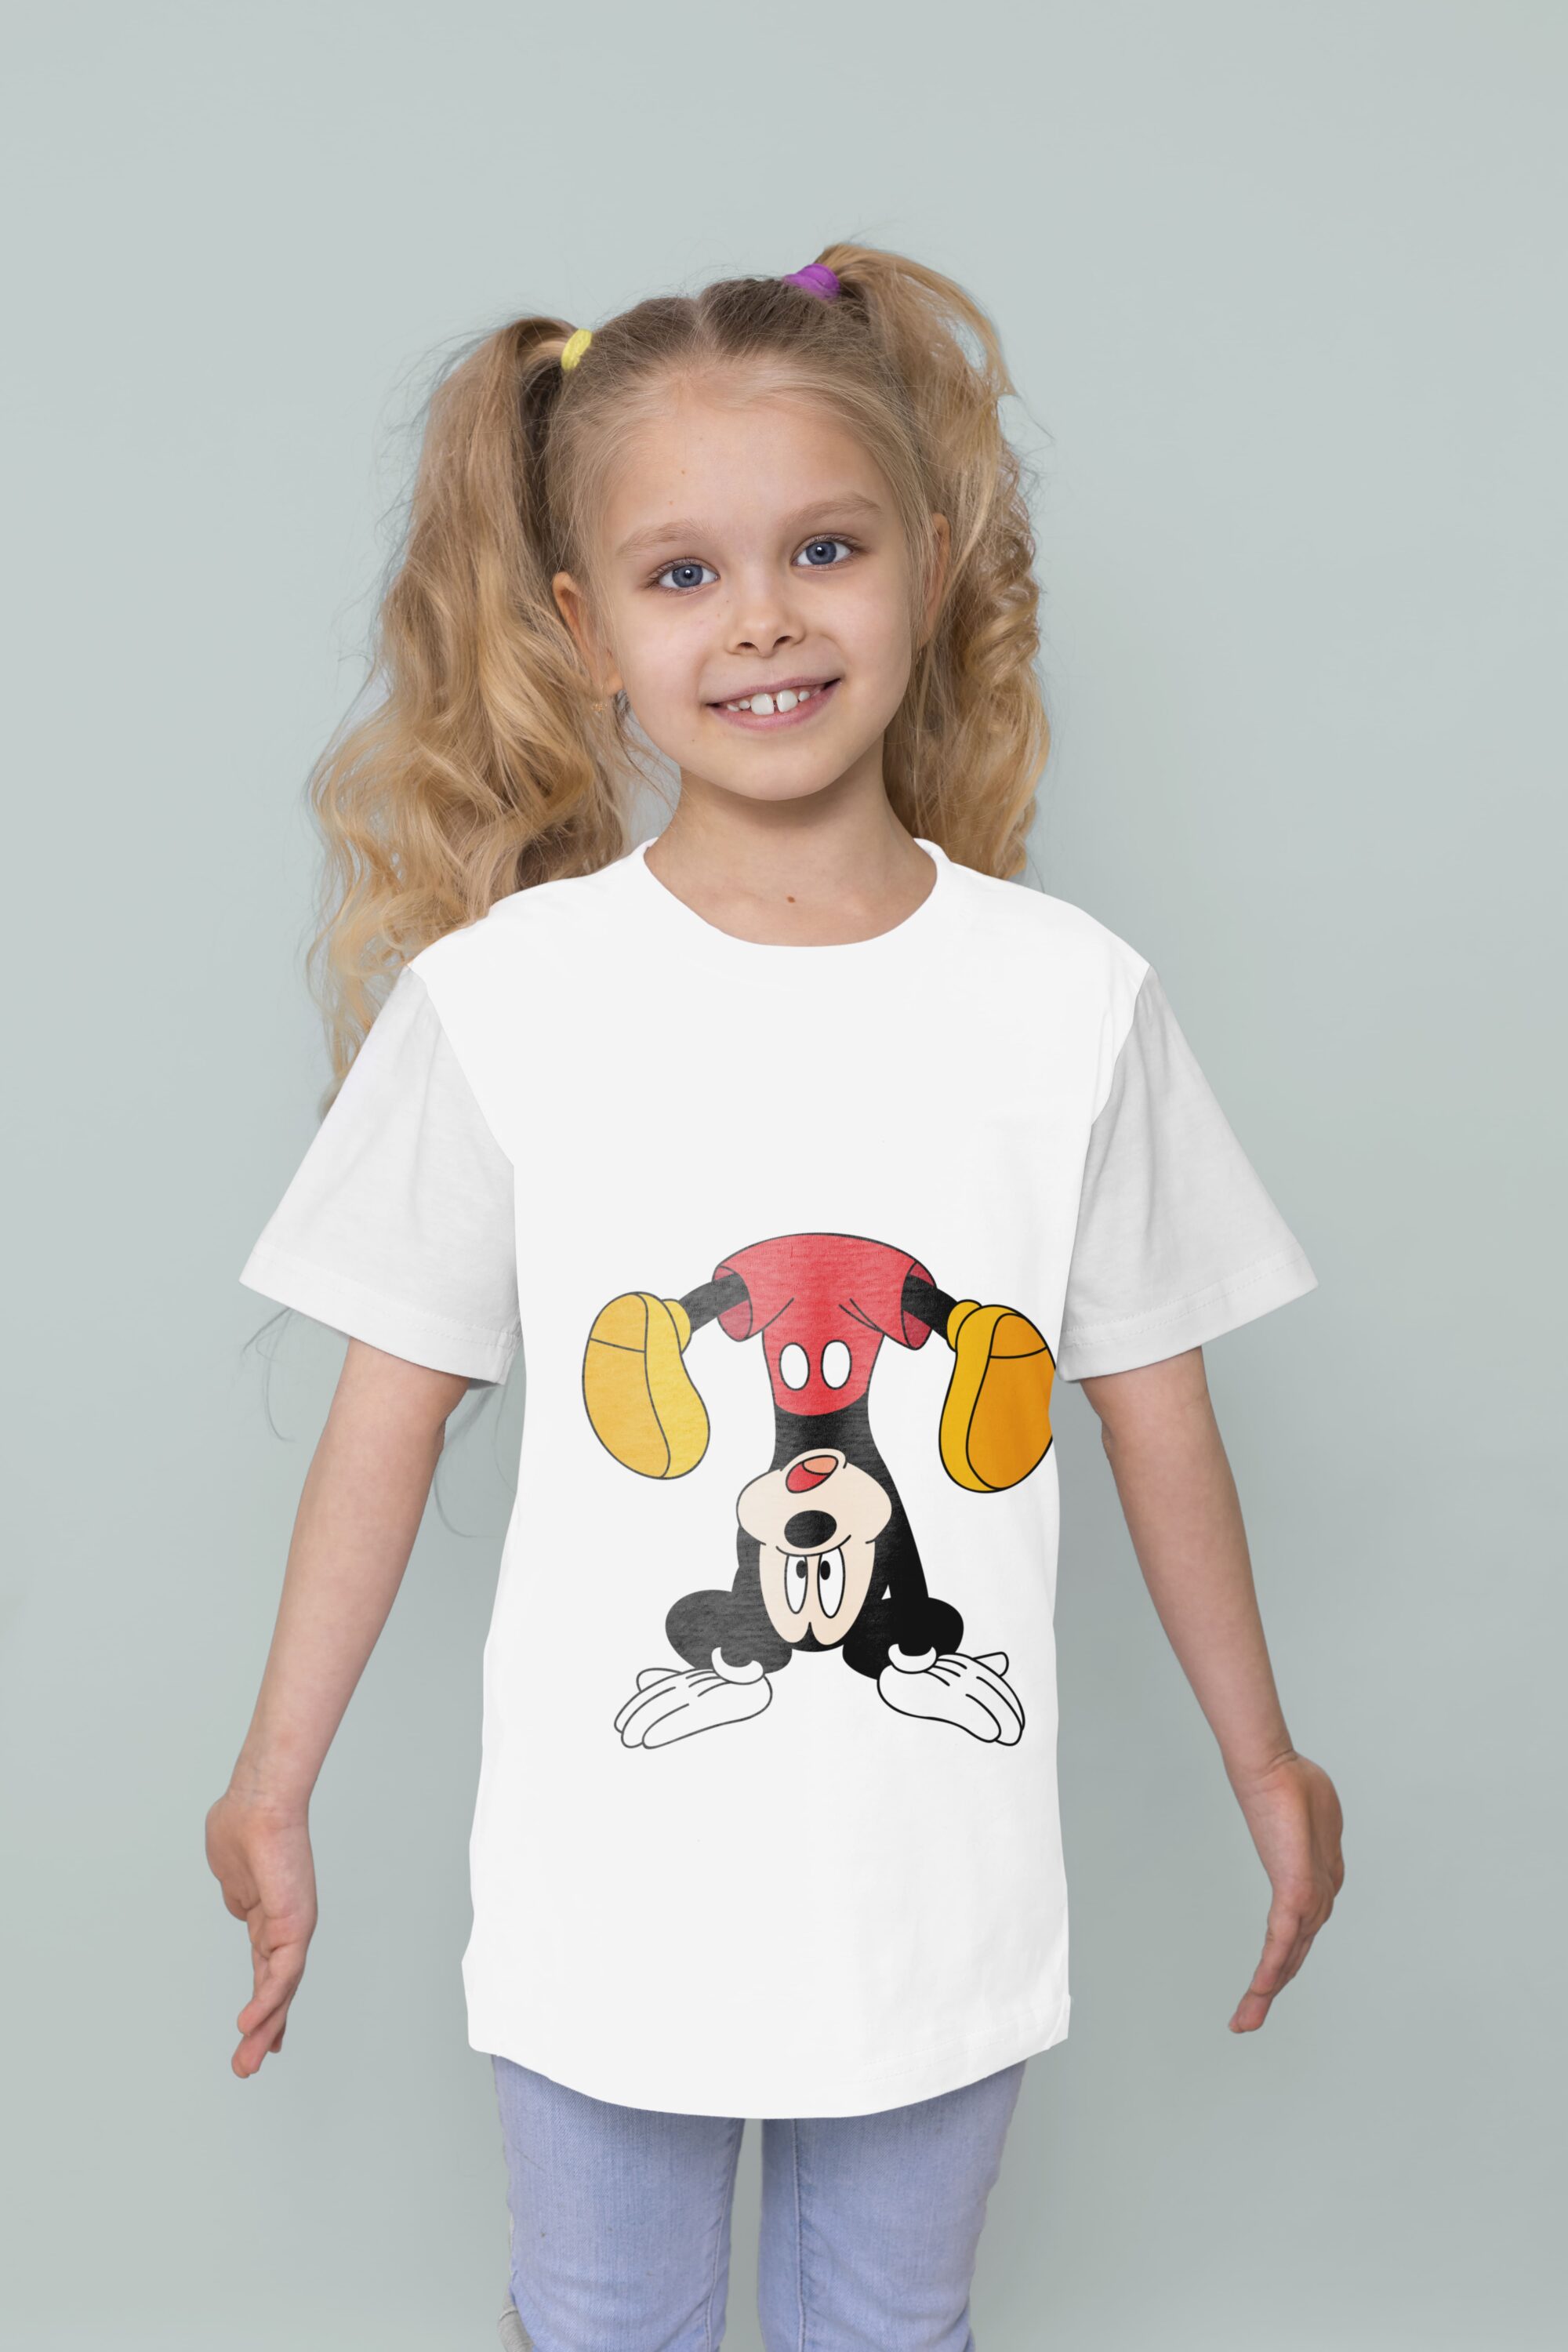 Cute t-shirt with disney mickey mouse.